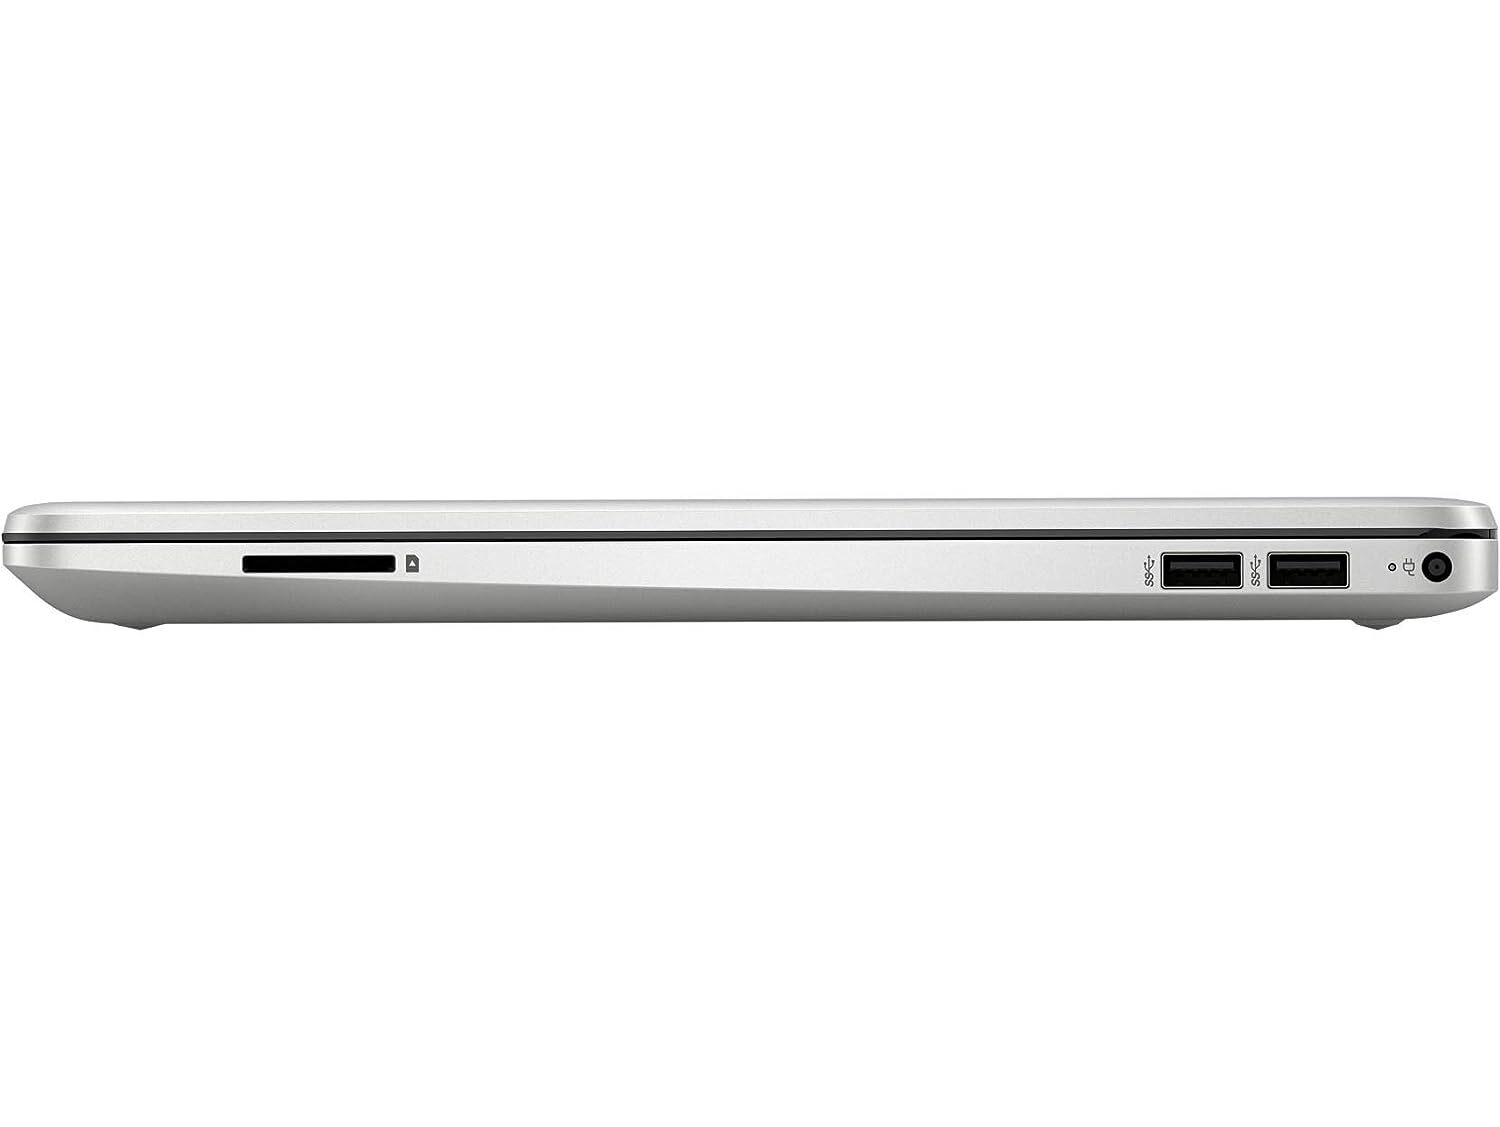 HP 15 Thin & Light 11th Gen Intel Core i5-1135G7 15.6 inches FHD Laptop, 8GB DDR4, 1TB HDD, Windows 10 Home, MS Office, Integrated Graphics, FPR 15 (Natural Silver, 1.76 Kg), 15s-du3032TU